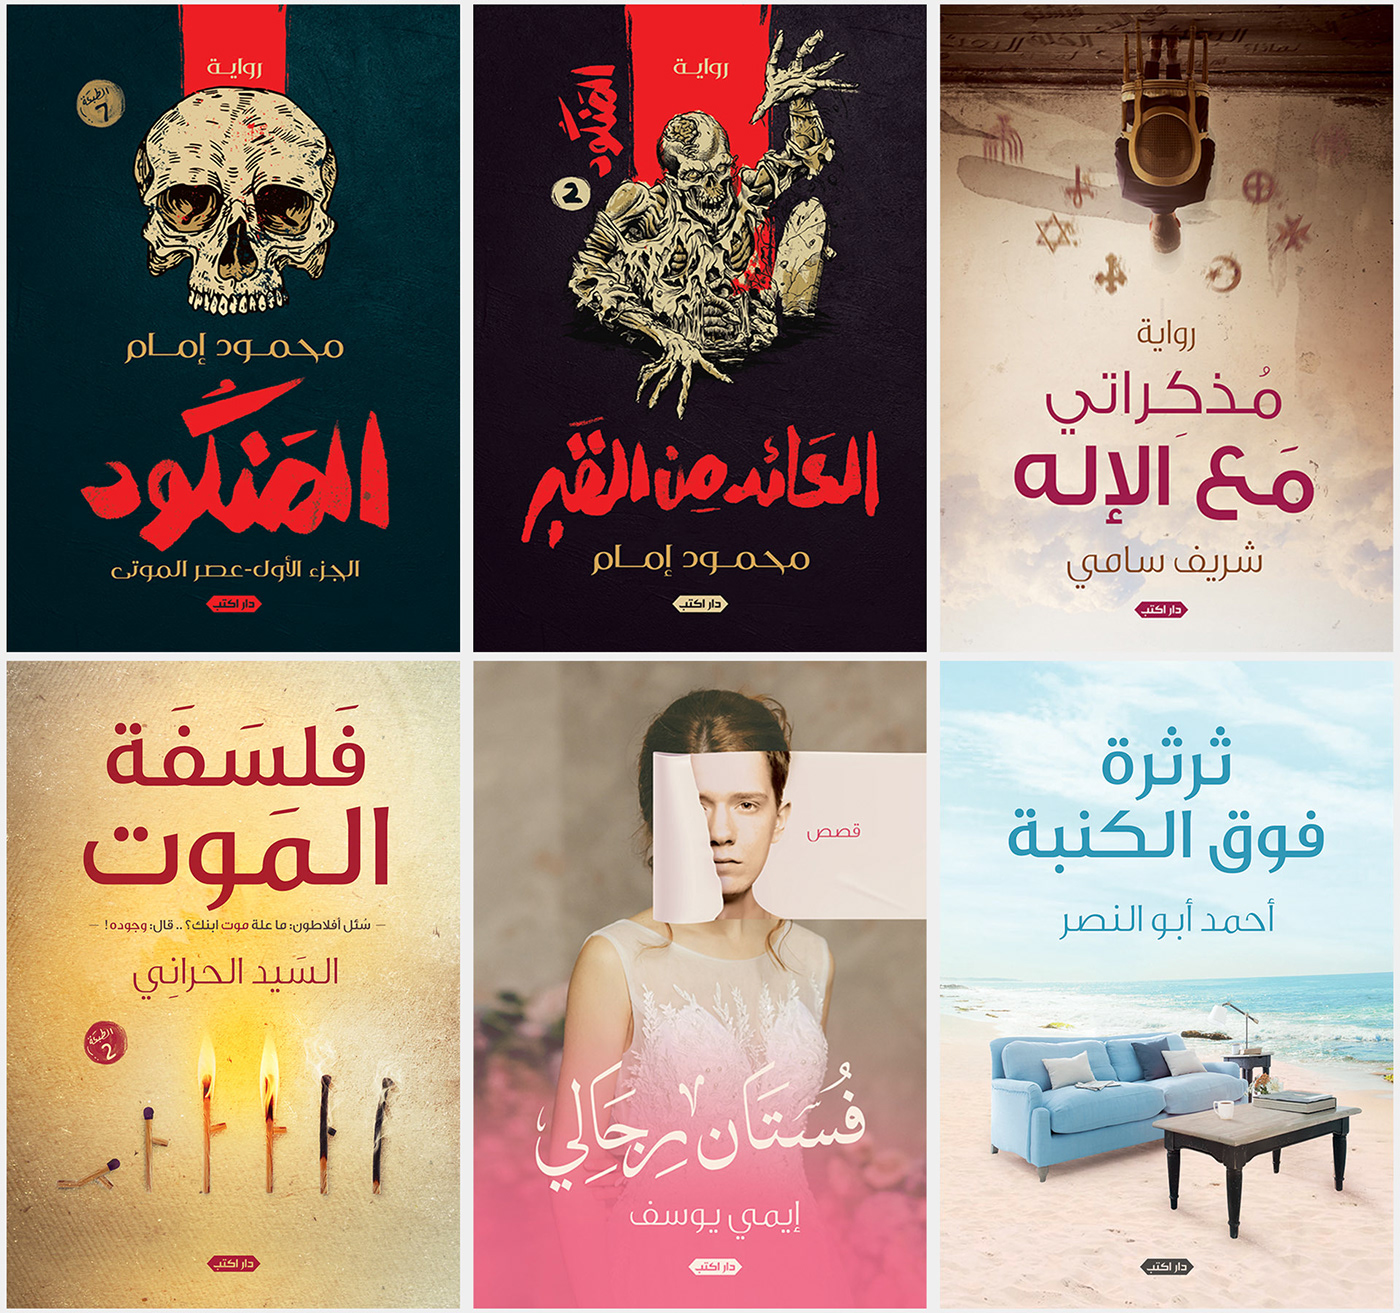 book bookcover book cover book covers posters Ahmed Farag ahed farag art ahz_art novel